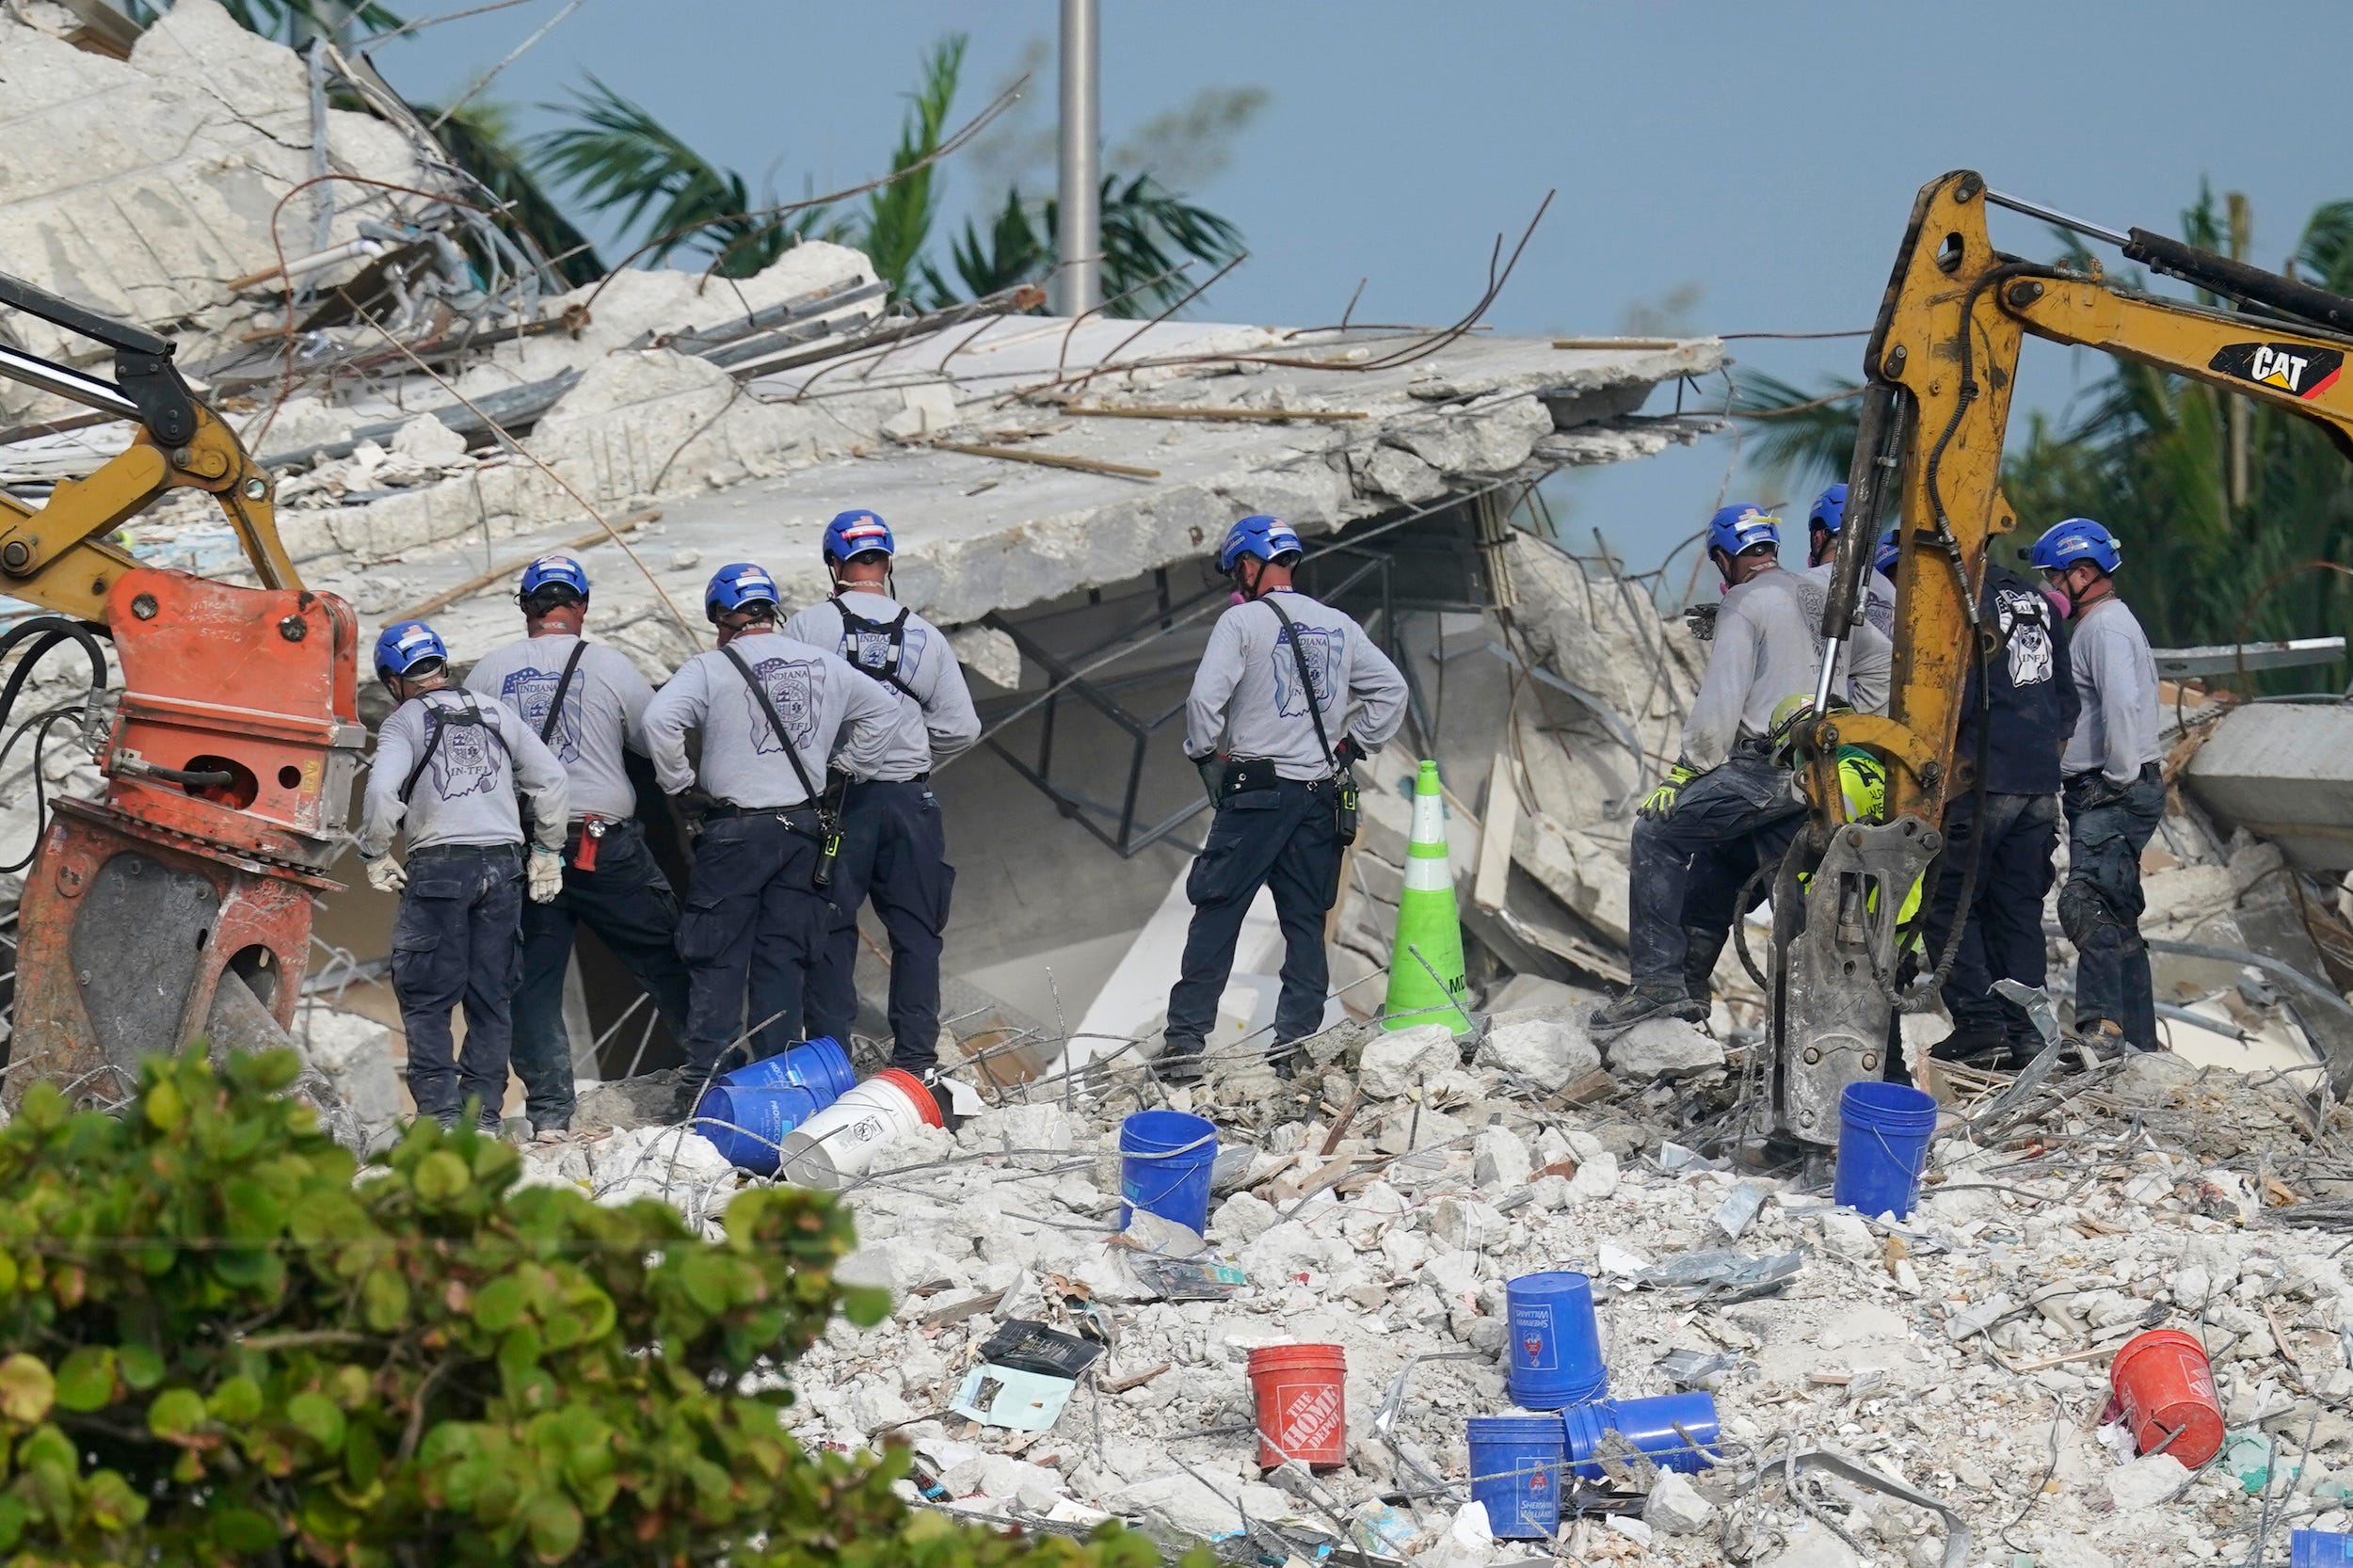 rescuers in hard hats look at rubble of the collapsed condo site